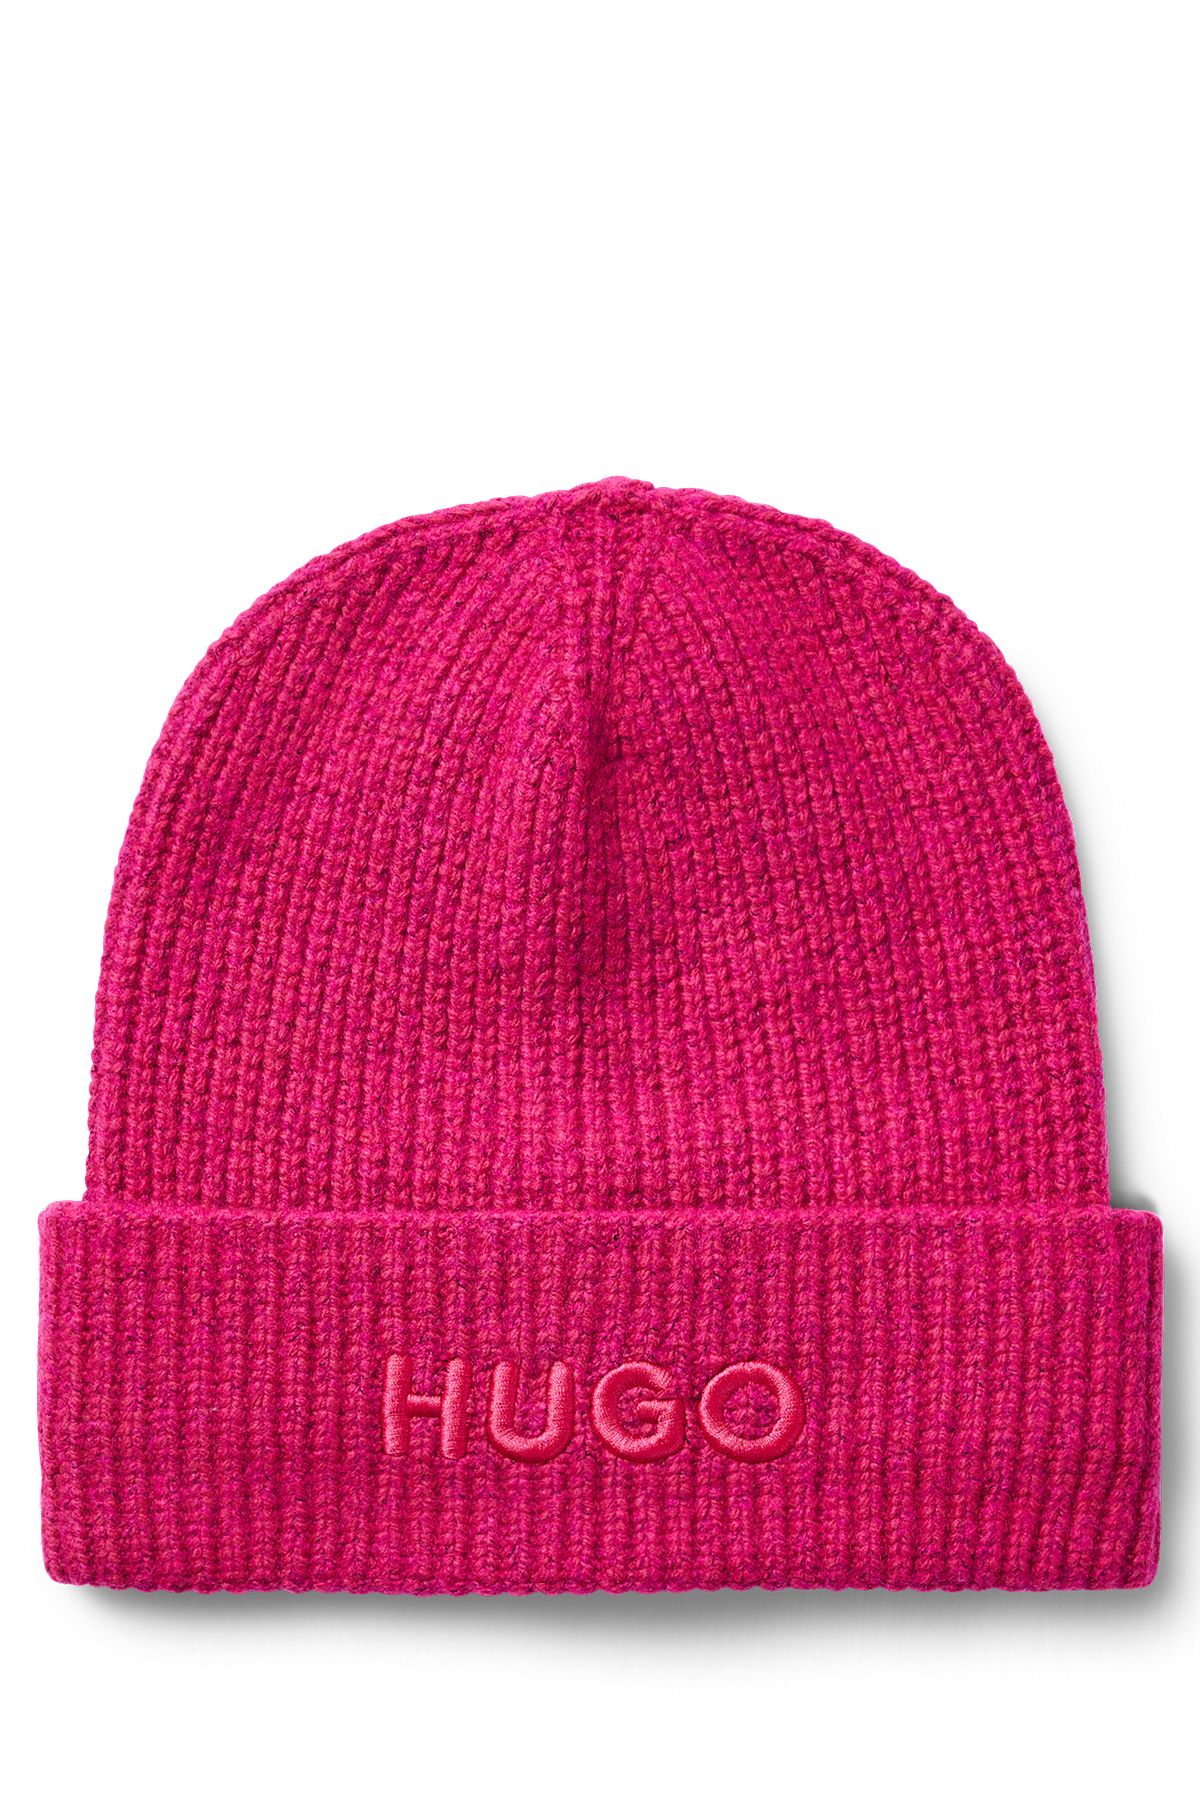 Ribbed beanie hat with embroidered logo, Pink